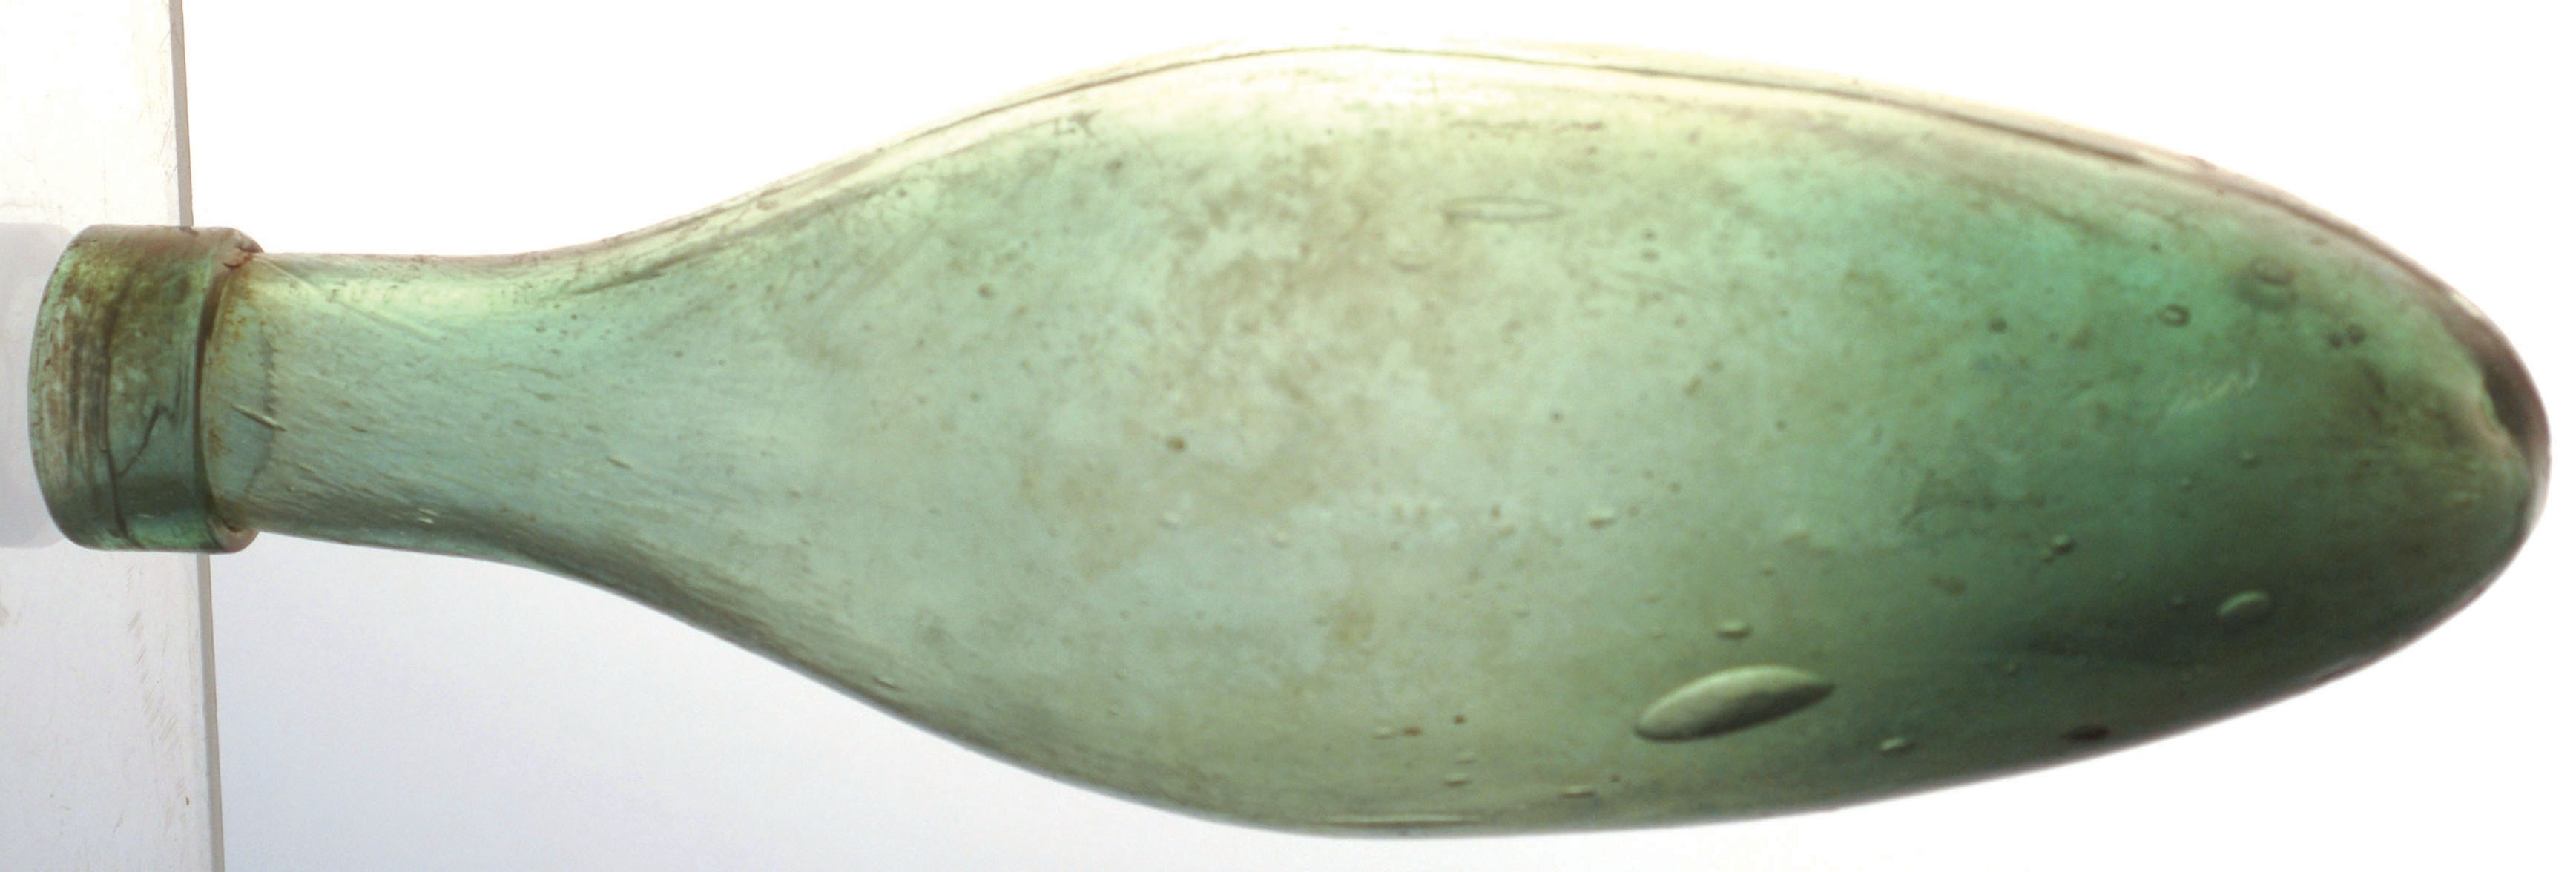 HAMILTON BOTTLE. 8.75ins long, dark aqua glass with square (early) lip unembossed. (NR)